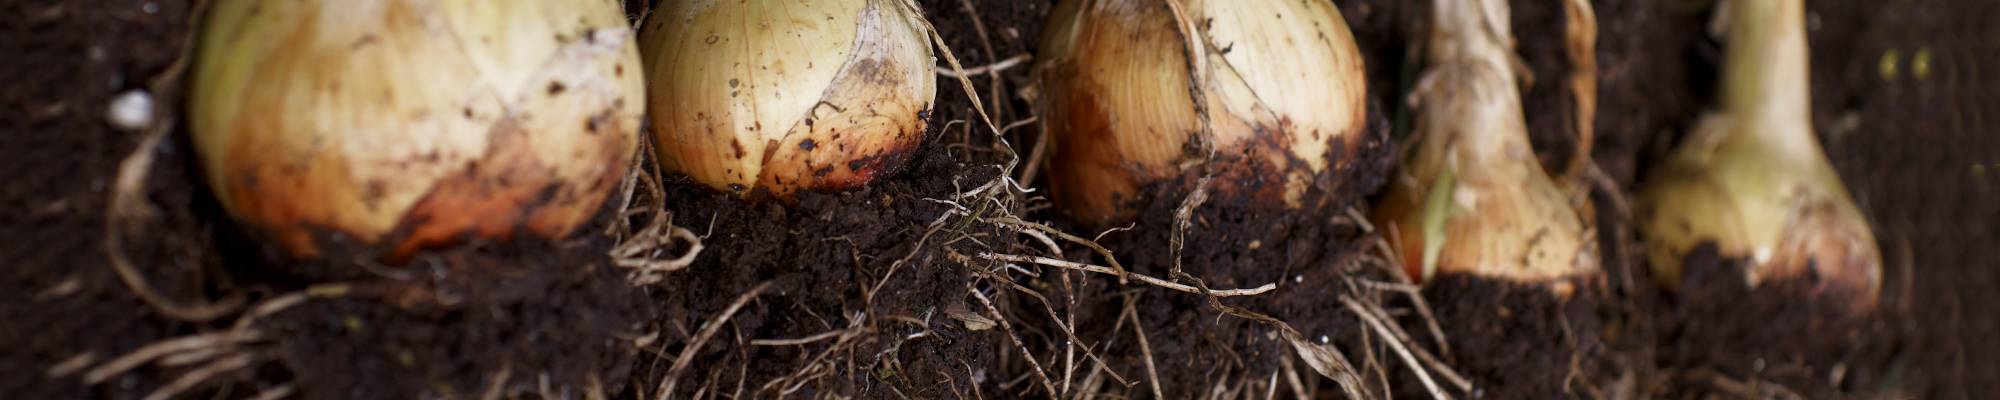 Tasty onions courtesy of organic compost at Yeo Valley